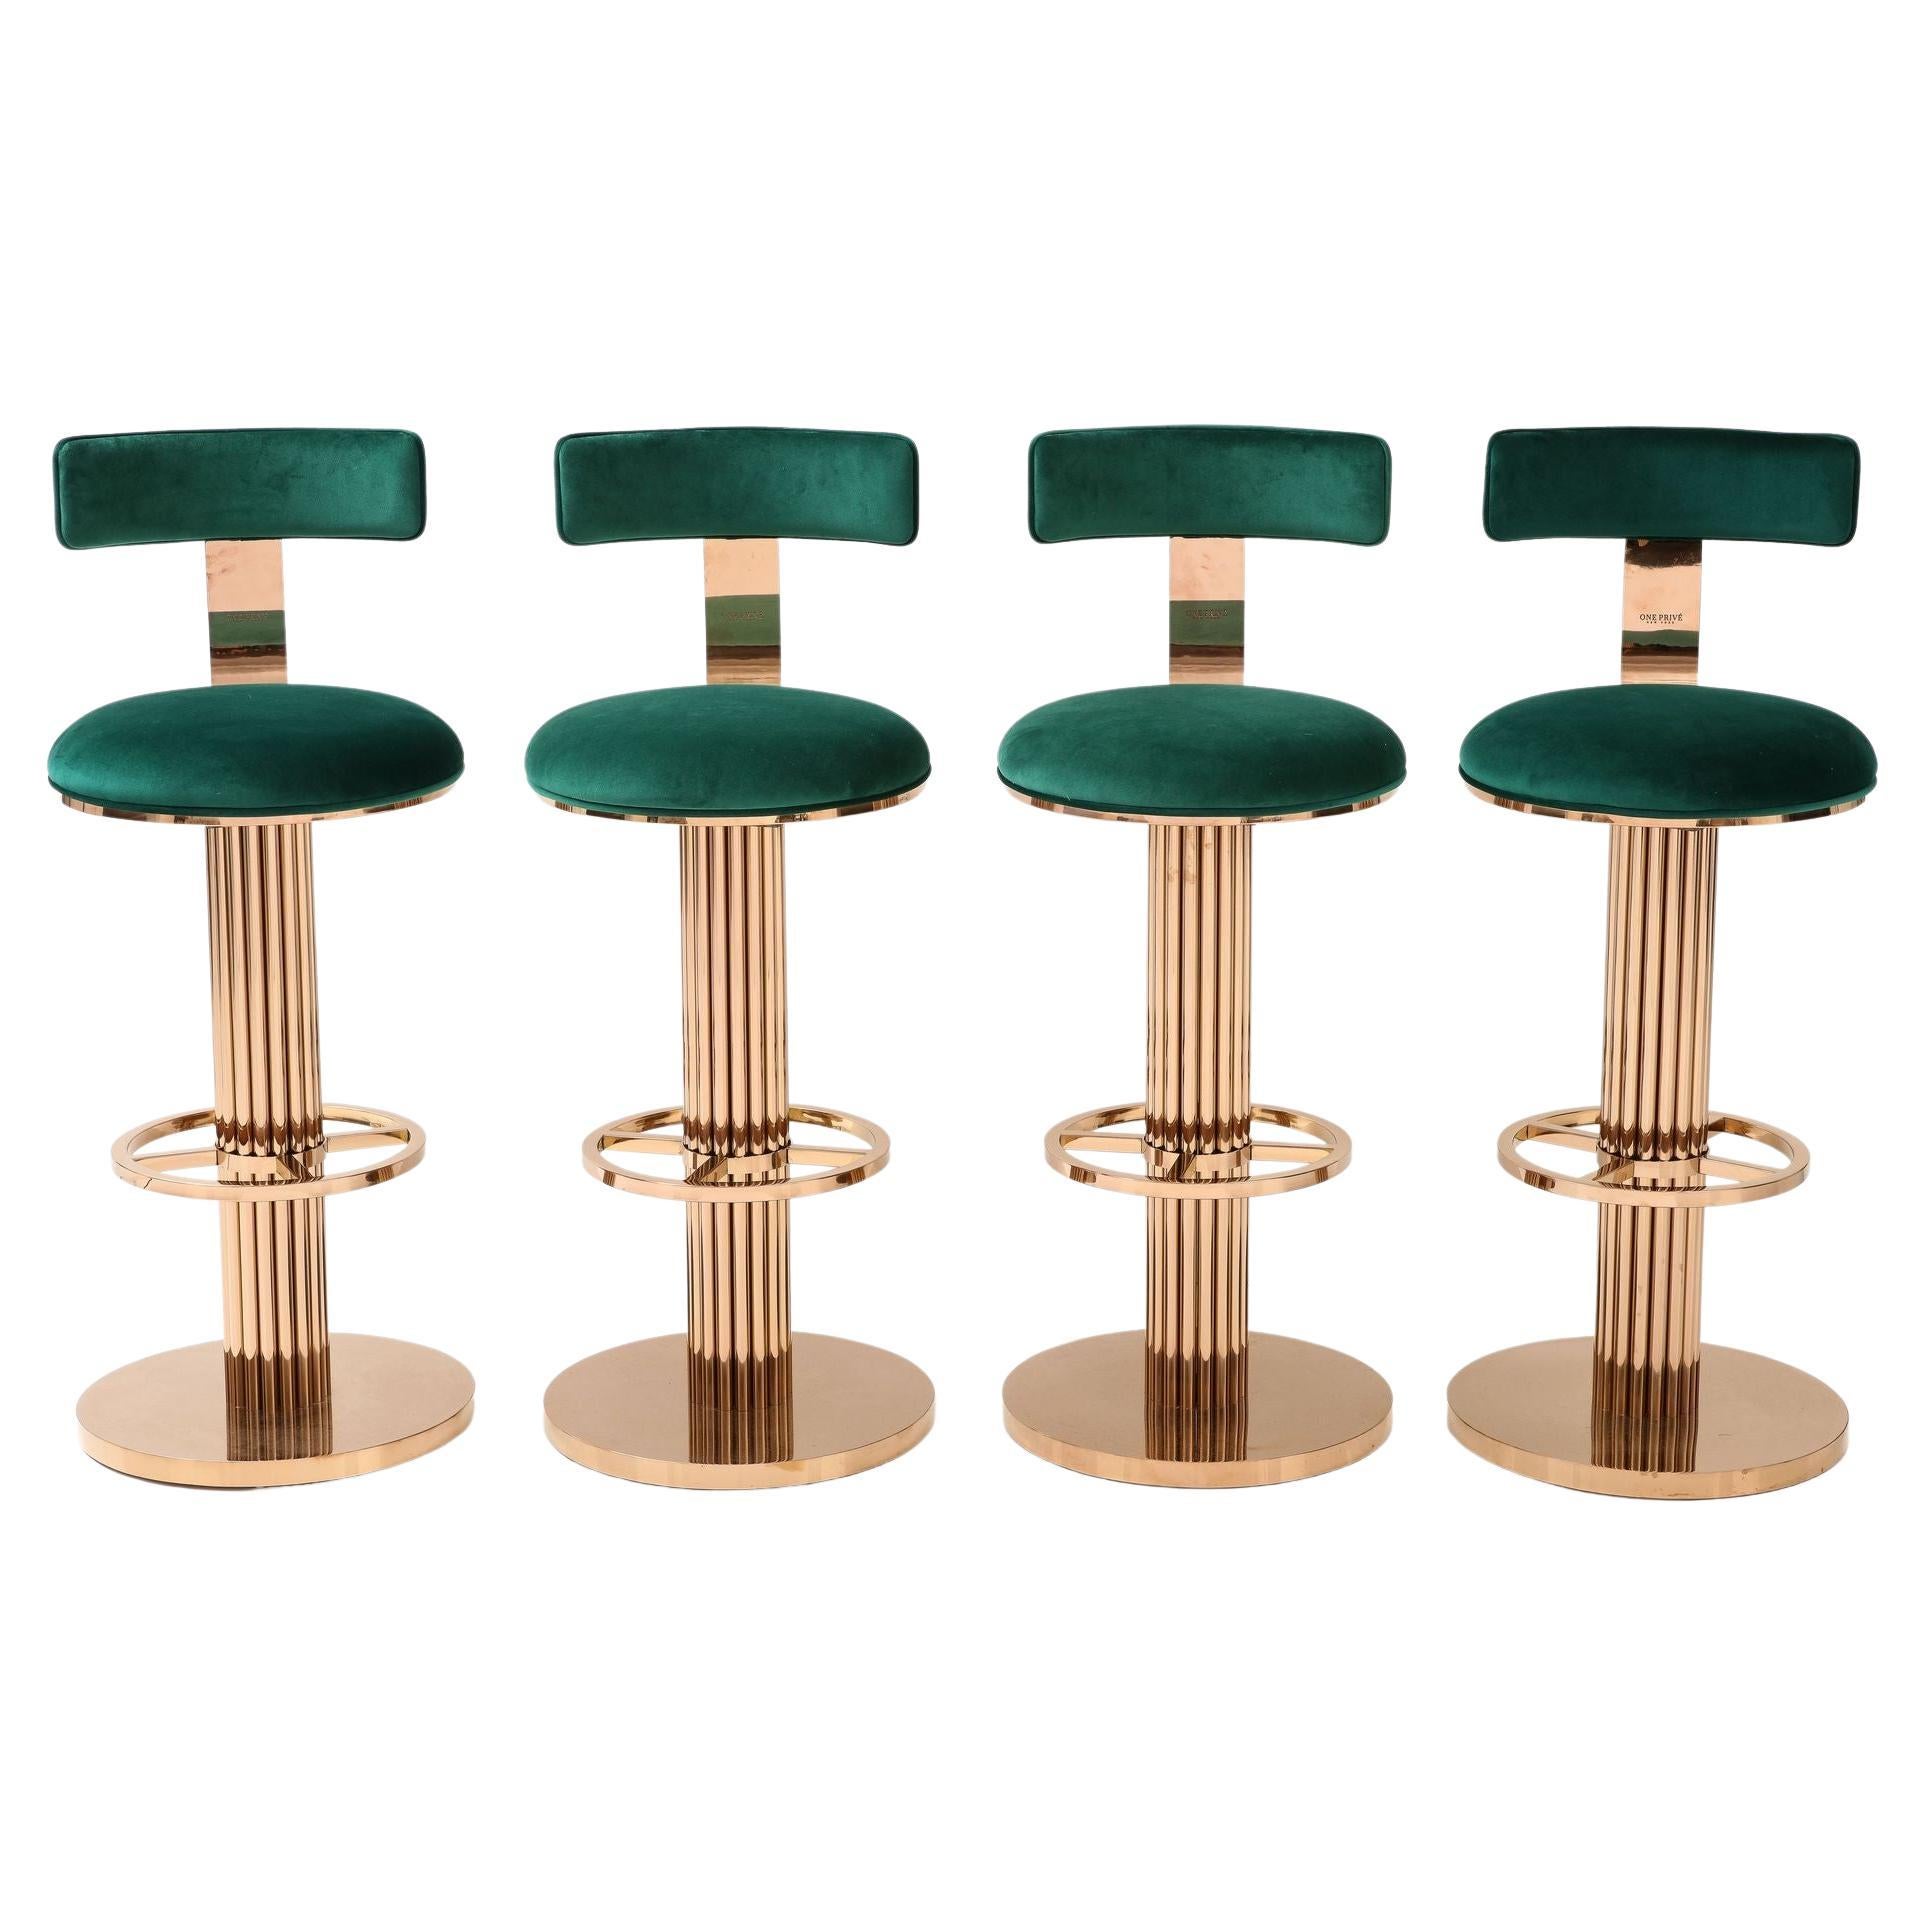 Set of Four Rose Gold and Emerald Barstools in the Design For Leisure Style